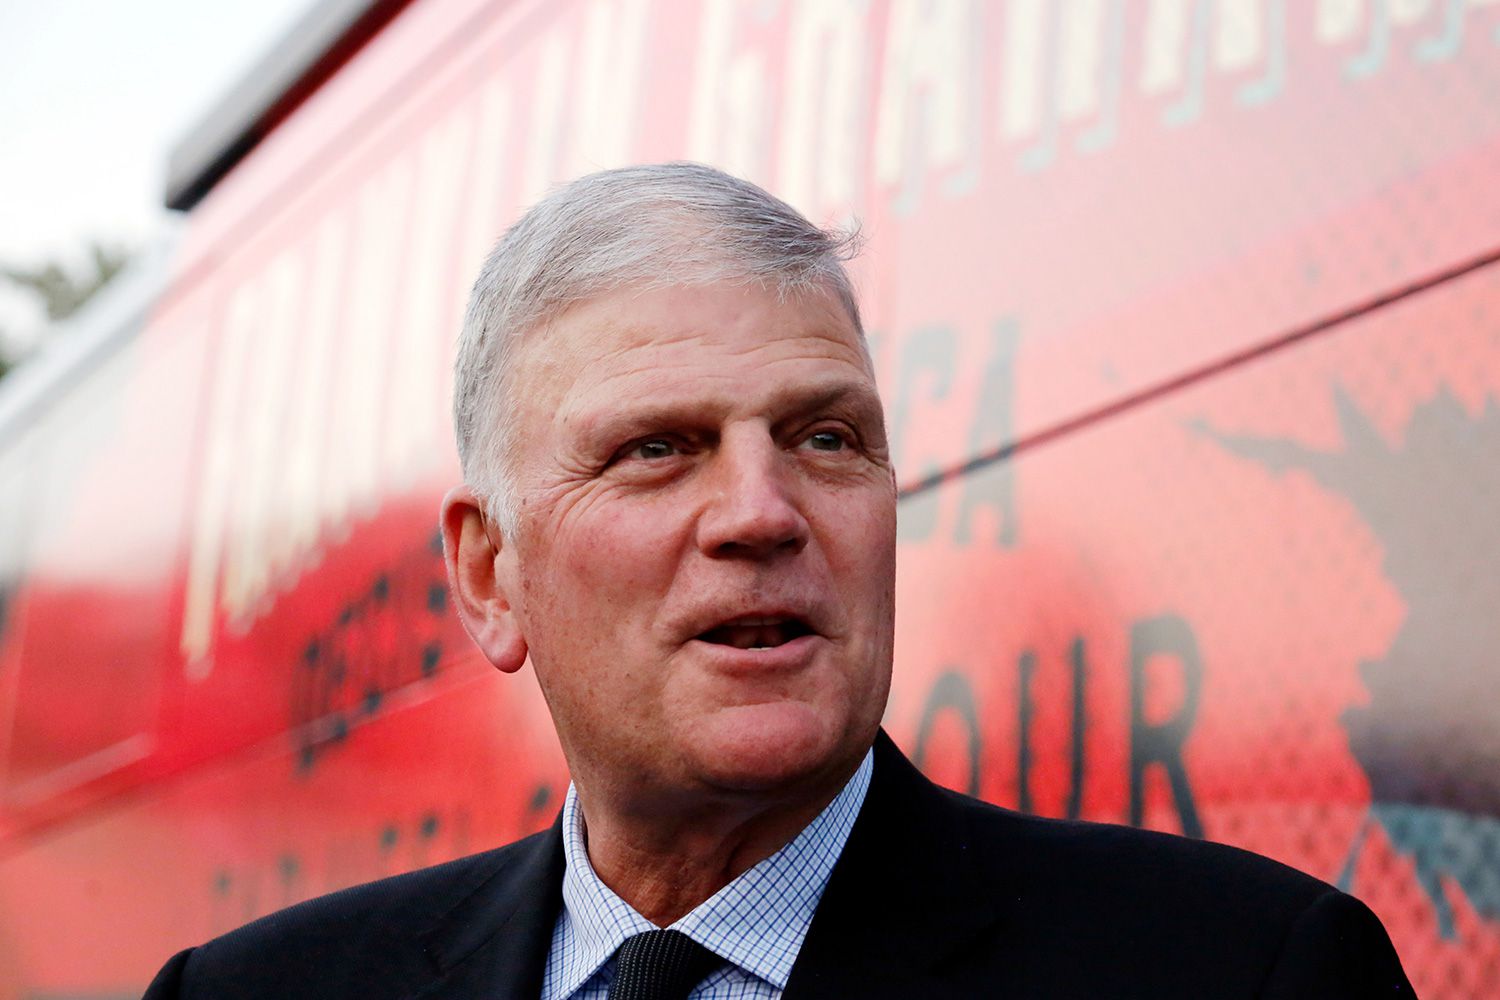 30-facts-about-franklin-graham